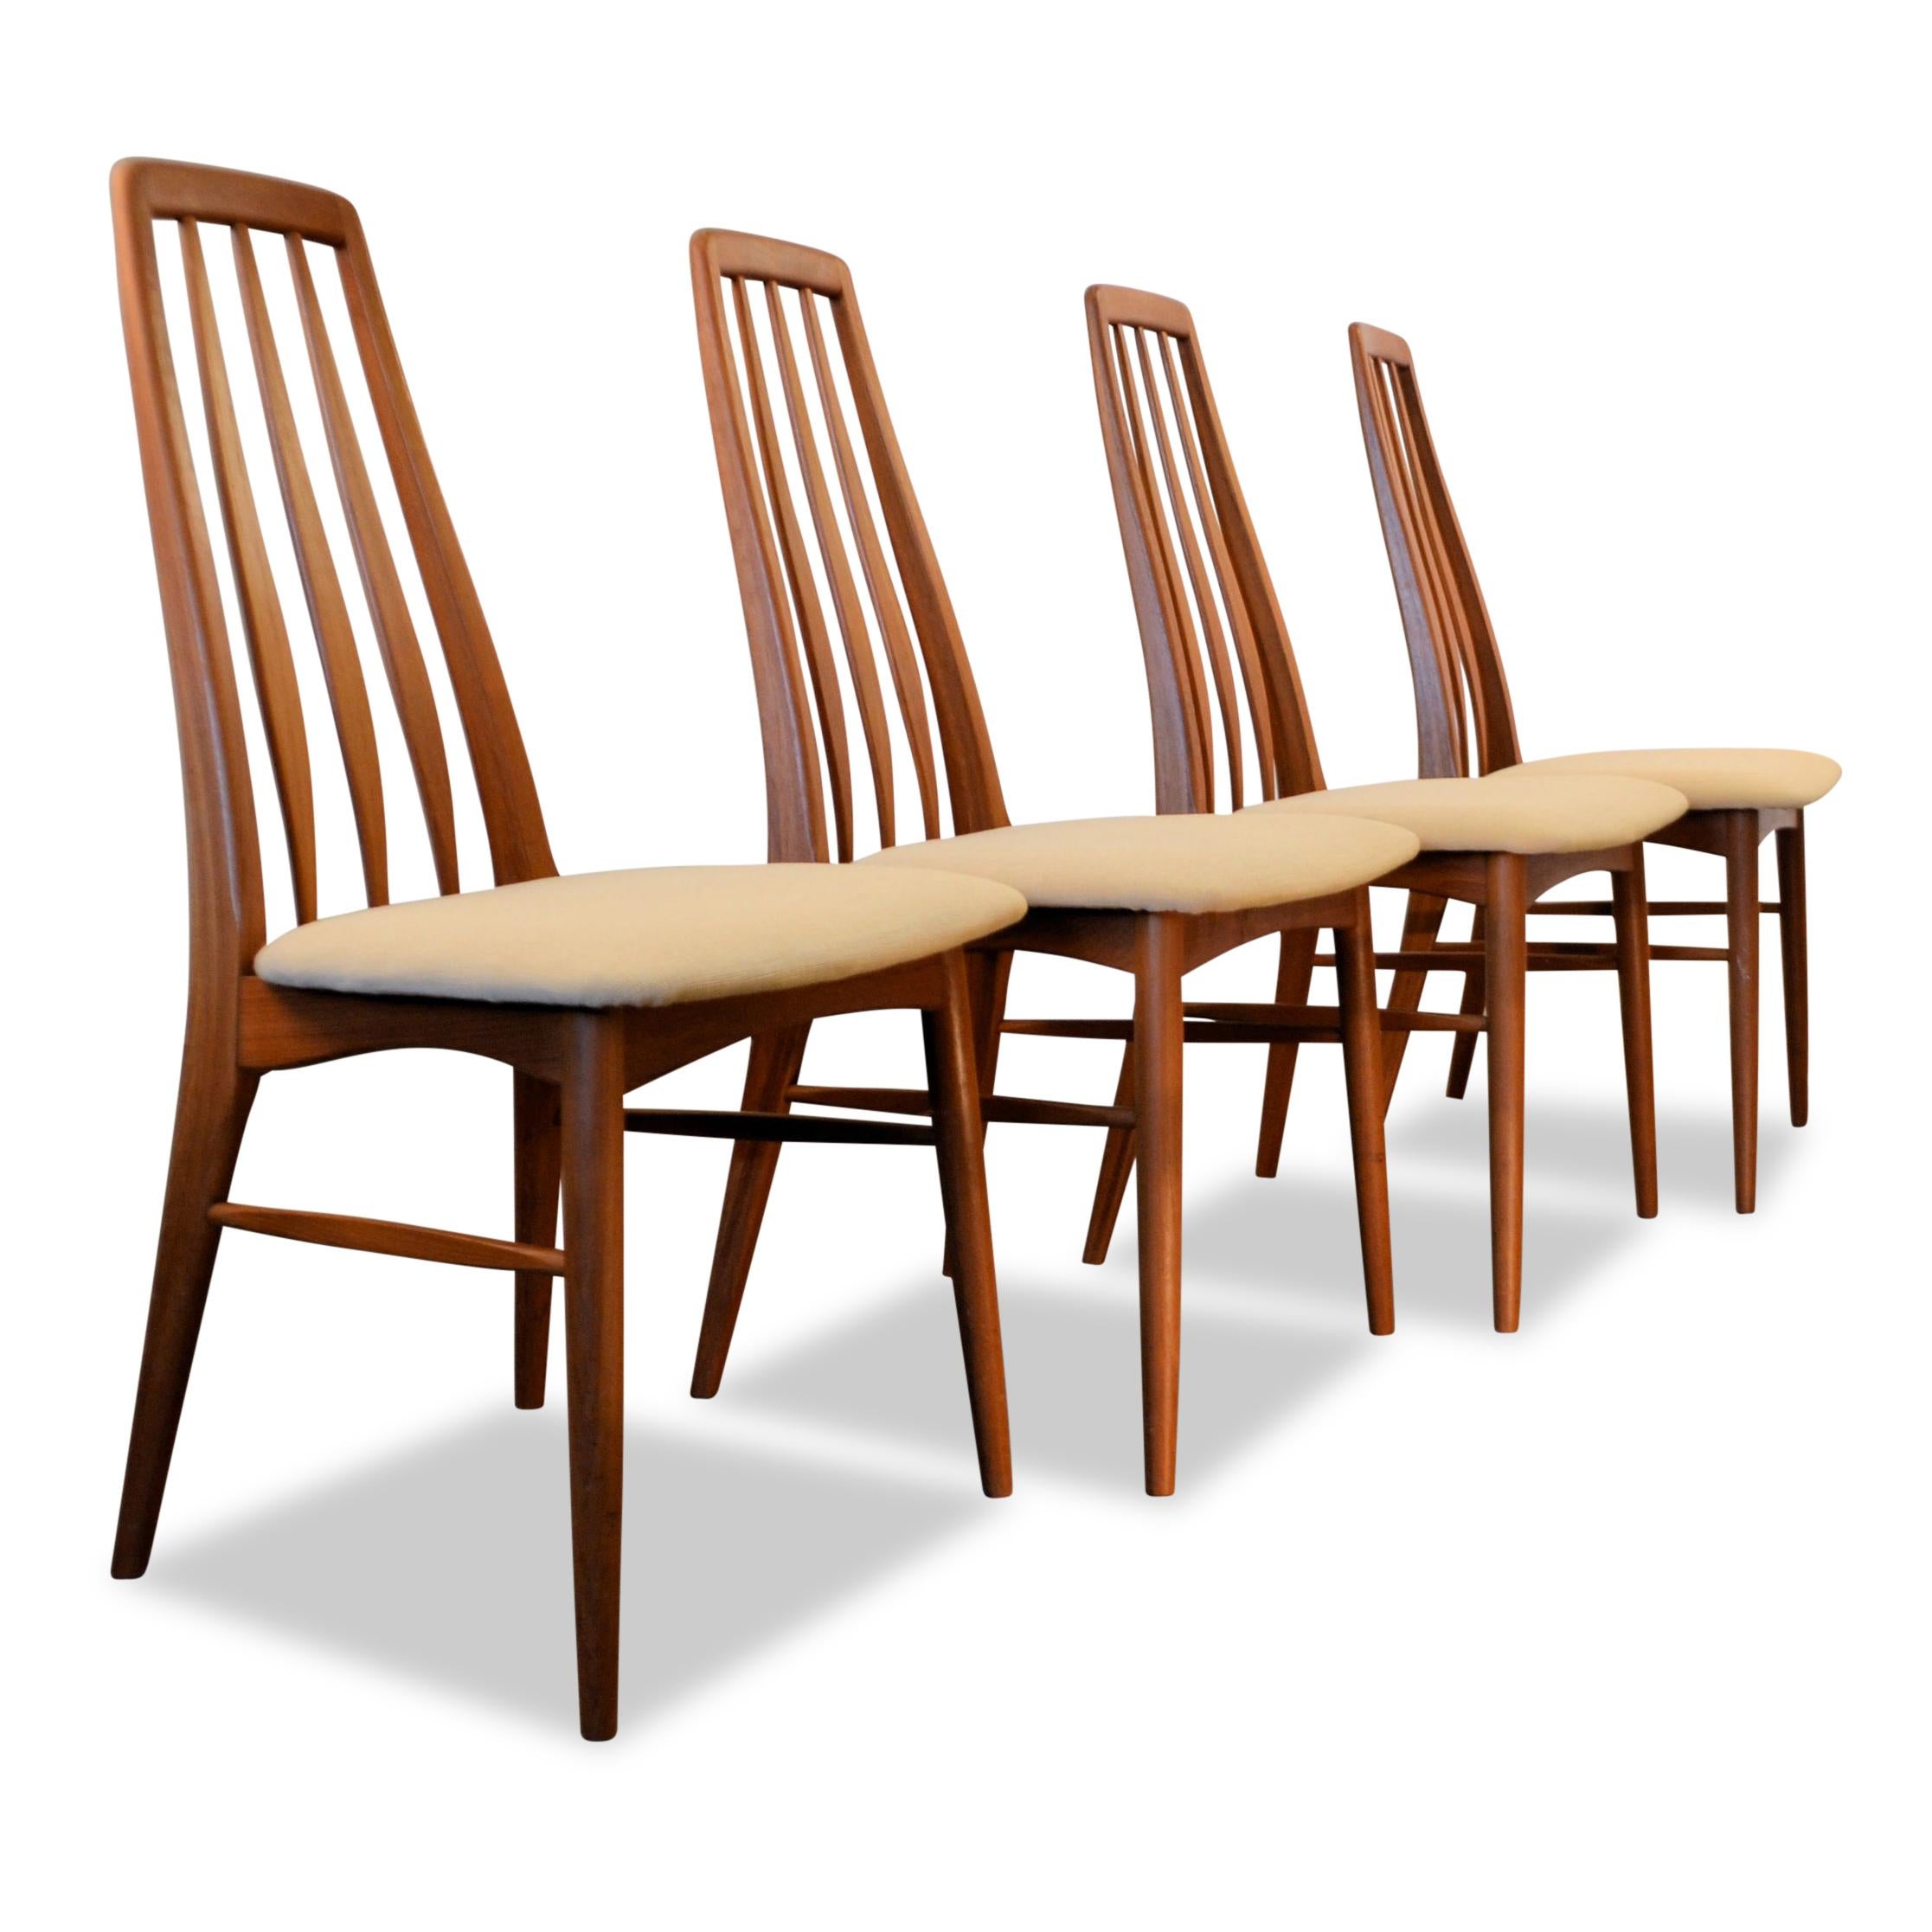 Set of four Danish design teak dining chairs designed by Niels Koefoed for Hornslet during the 1960s.